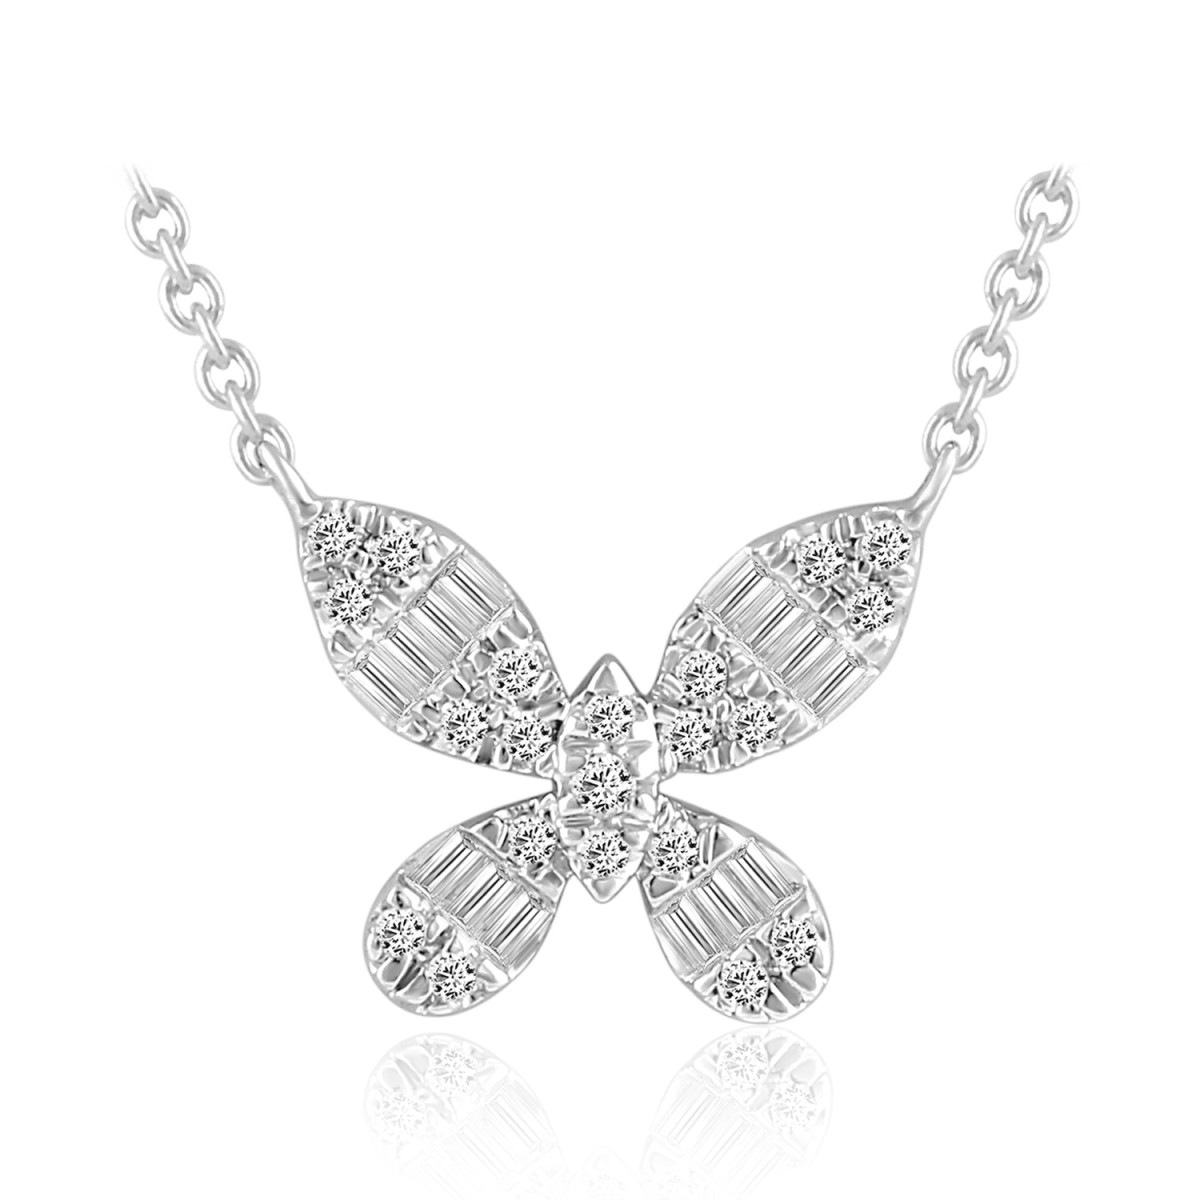 14K WHITE GOLD 1/5CT ROUND/BAGUETTE DIAMOND LADIES PENDANT WITH CHAIN 